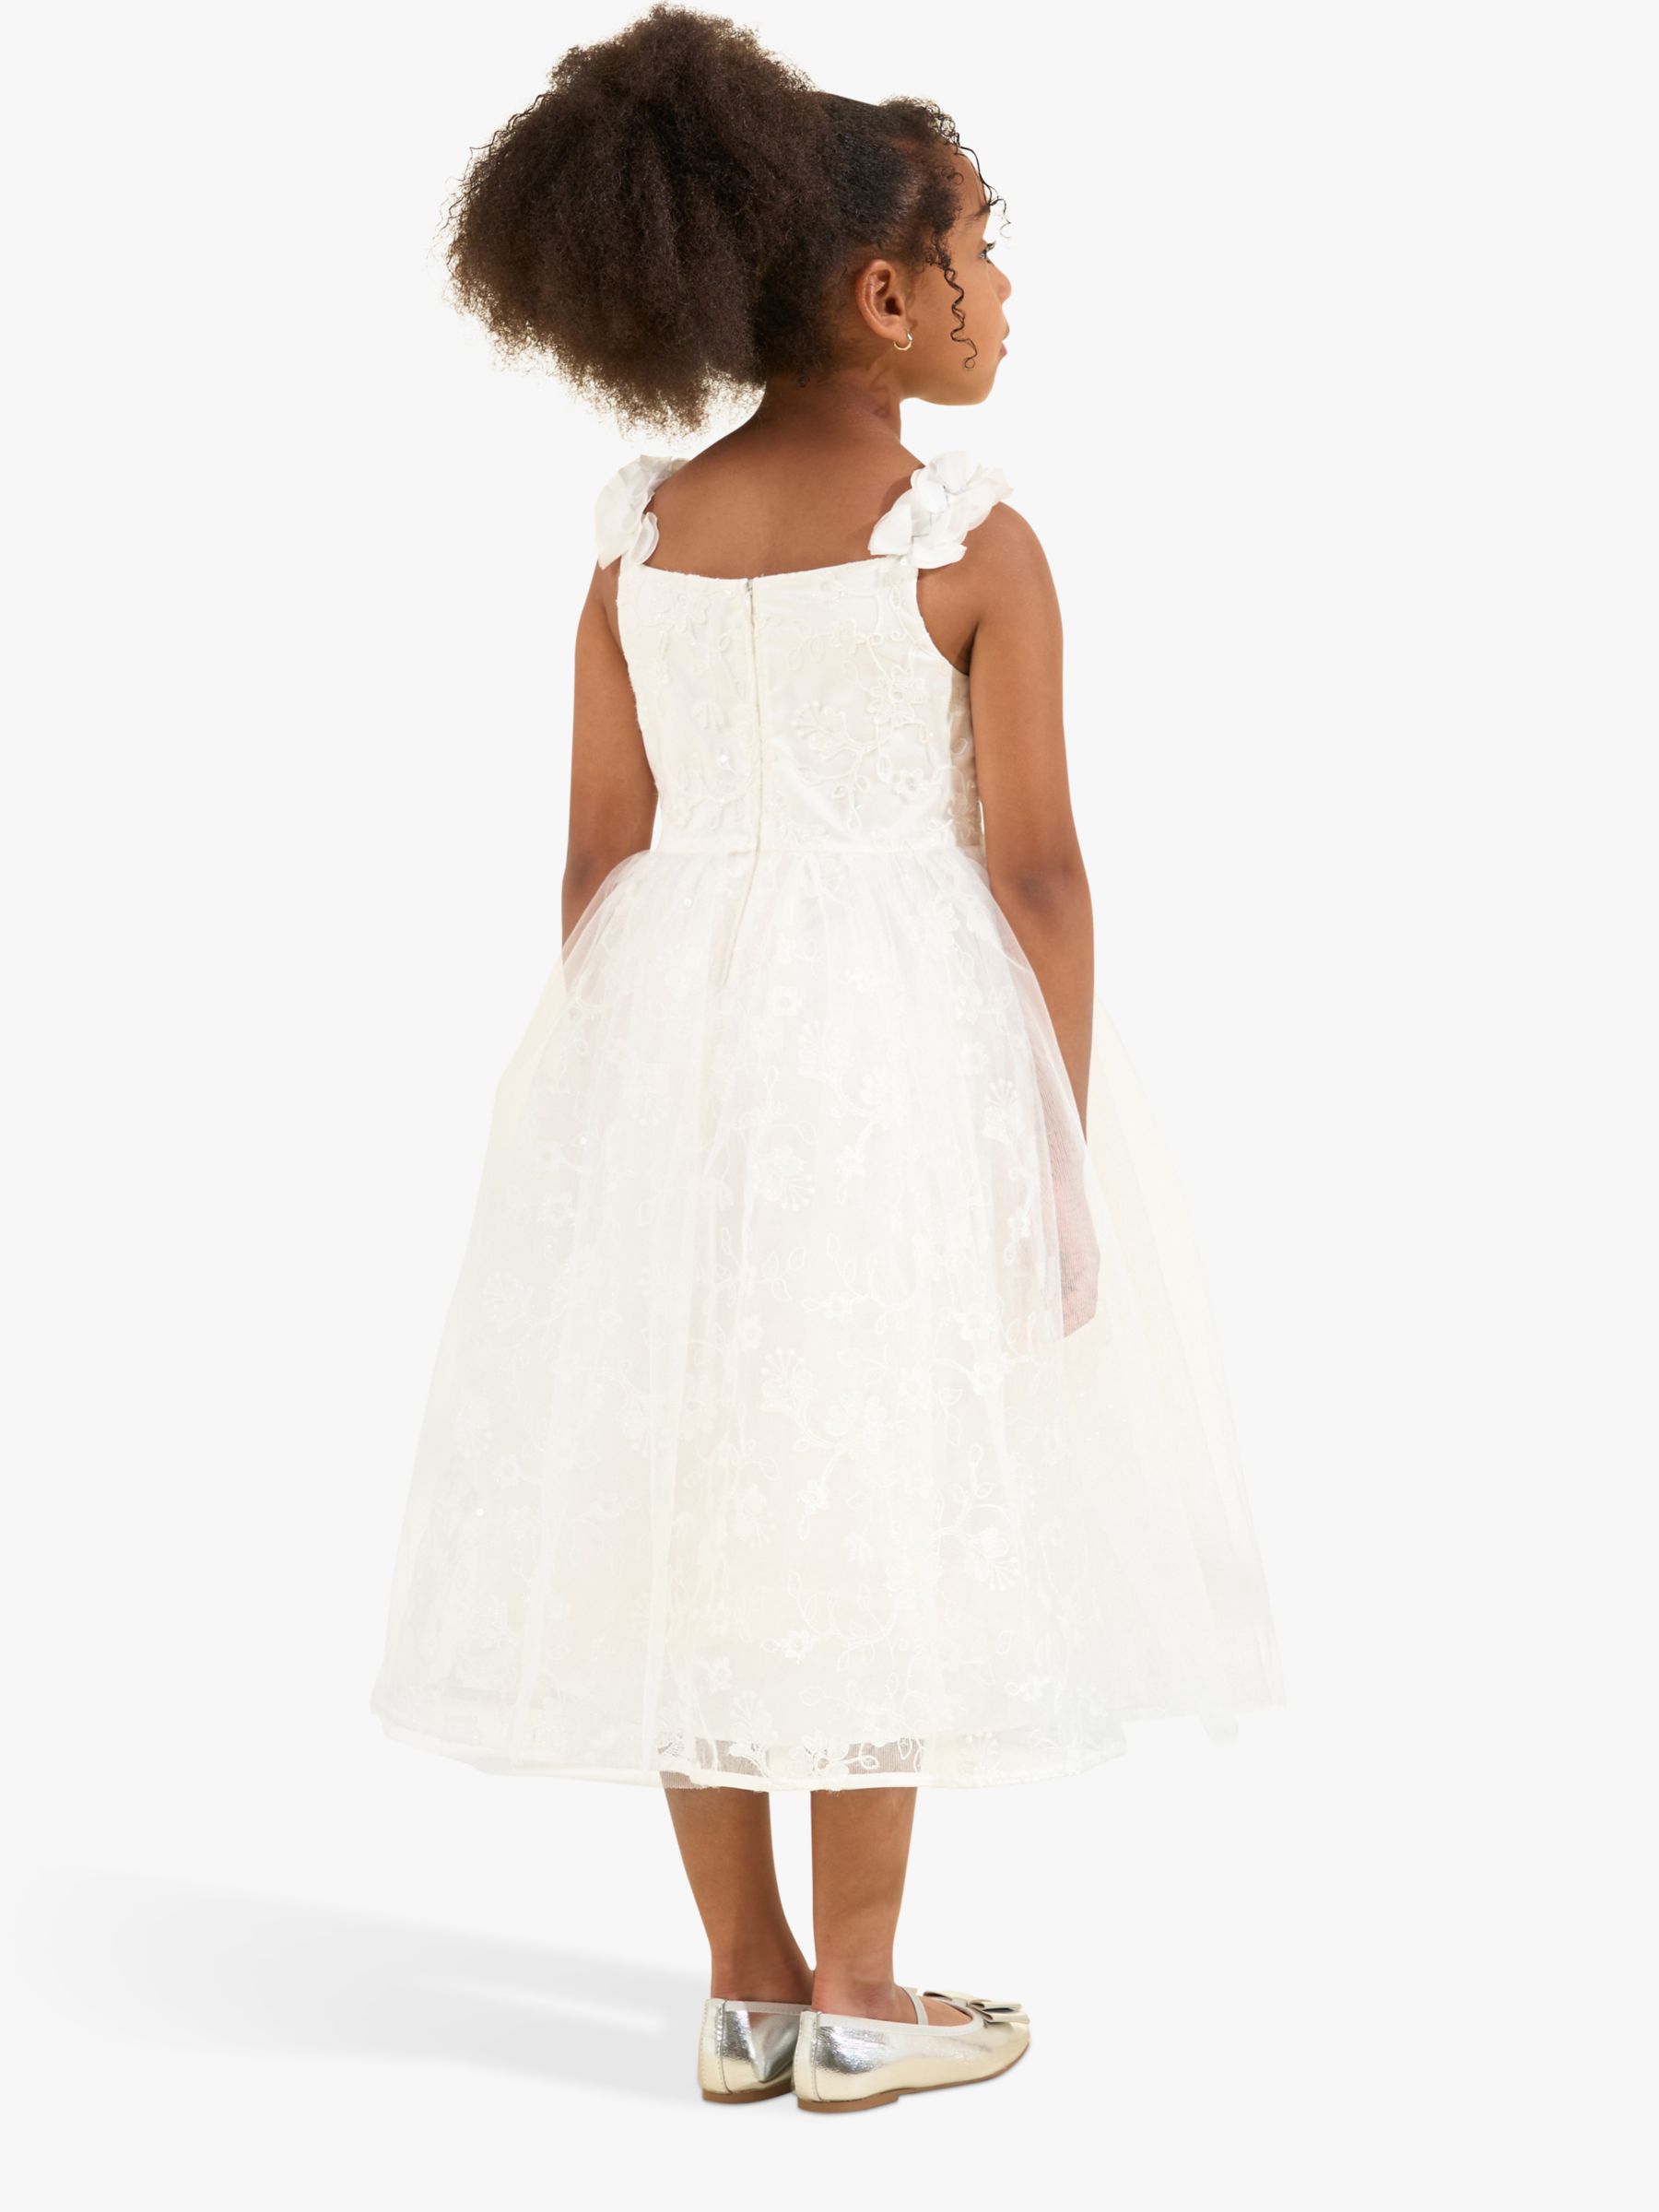 Angel & Rocket Kids' Olivia Sparkle Embroidered Ocassion Dress, White, 9 years